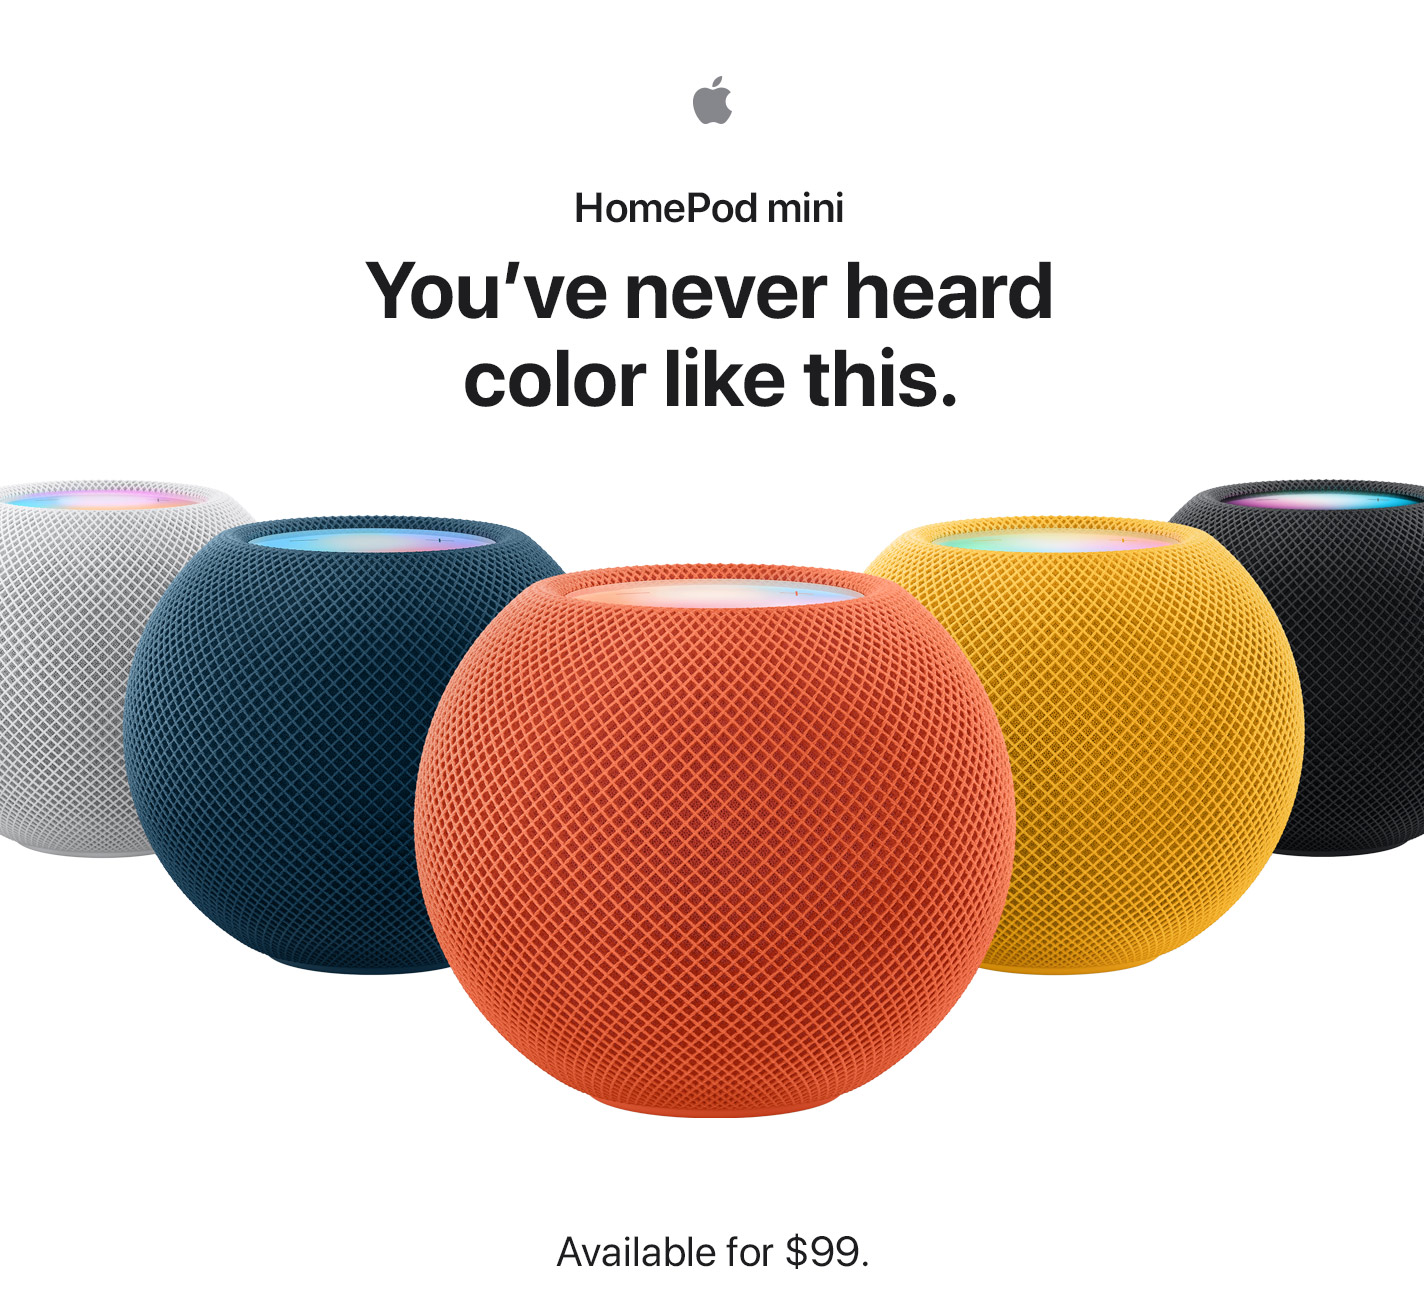 HomePod mini You've never heard color like this. Available for $99.